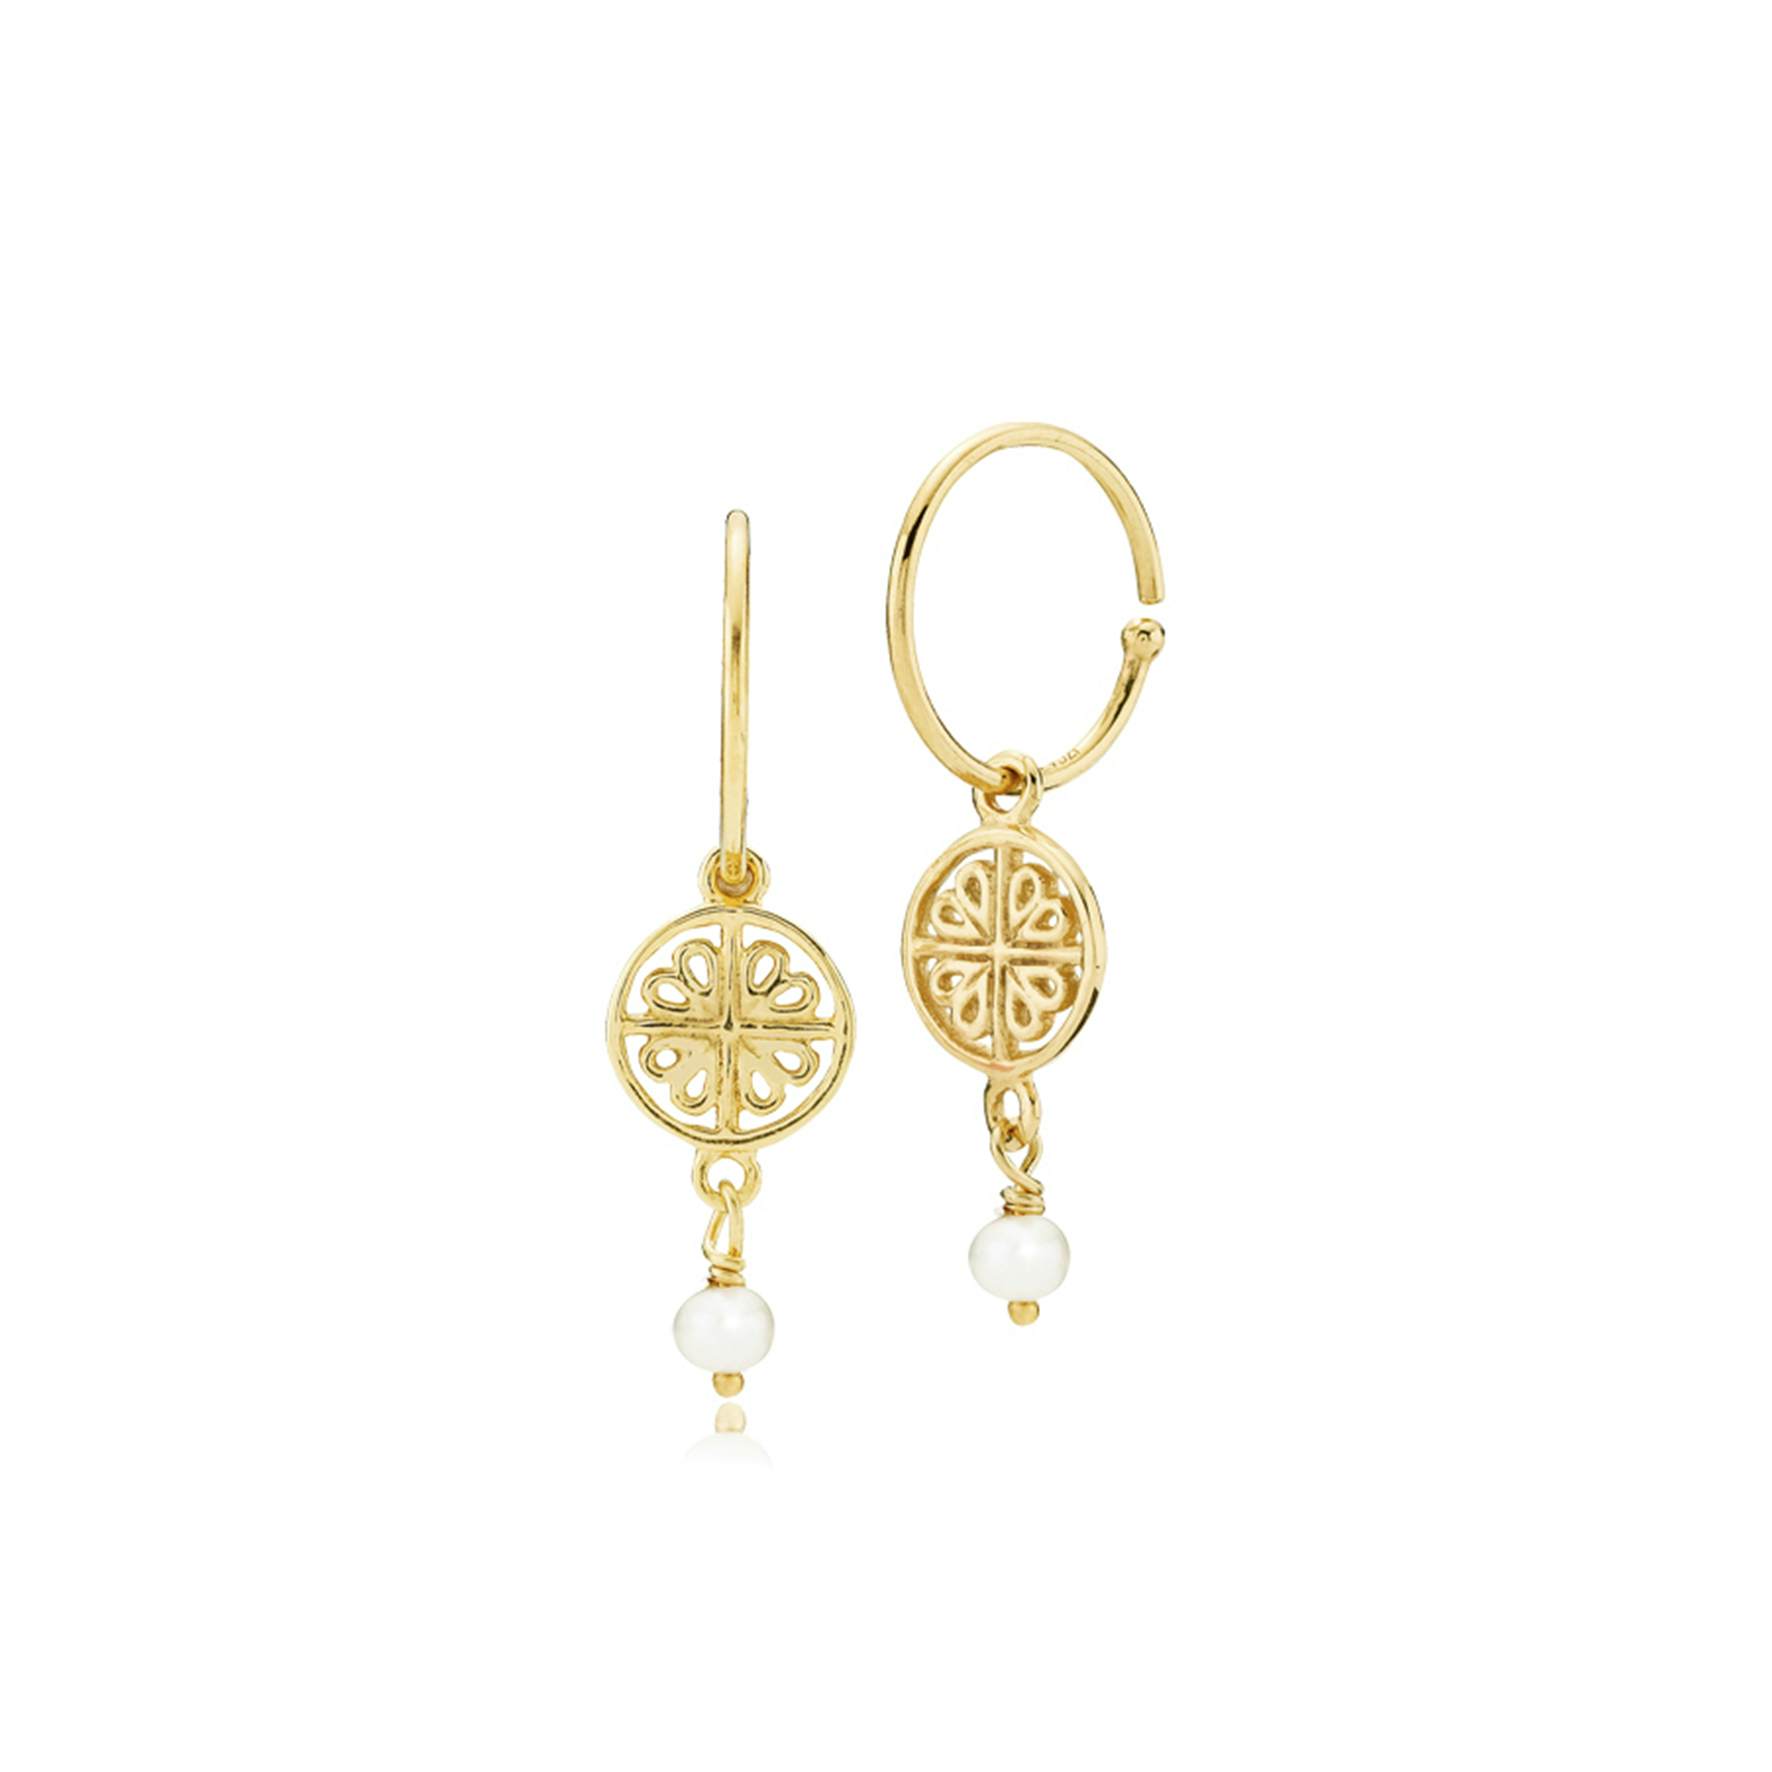 Balance Creol Earrings With Pearl from Sistie in Goldplated-Silver Sterling 925|Freshwater Pearl|Blank